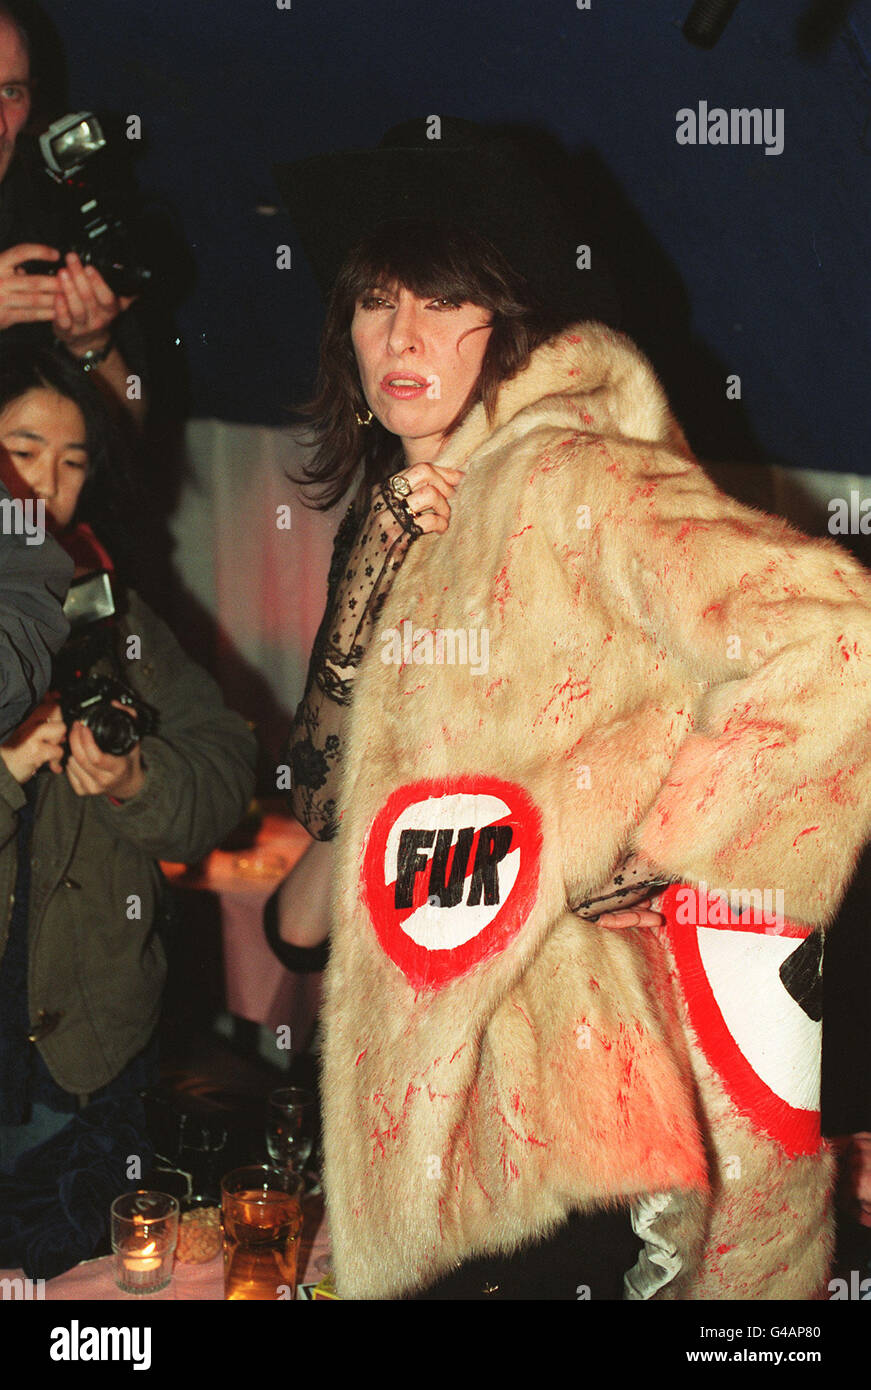 ønskelig Sidelæns gele PA NEWS PHOTO 14/03/93 CHRISSIE HYNDE AMERICAN SINGER MODELS A SECOND-HAND  FUR COAT SPLATTERED IN RED PAINT DURING THE LAUNCH OF PETA PEOPLE FOR THE  ETHICAL TREATMENT OF ANIMALS AT LONDON'S "HEAVEN"